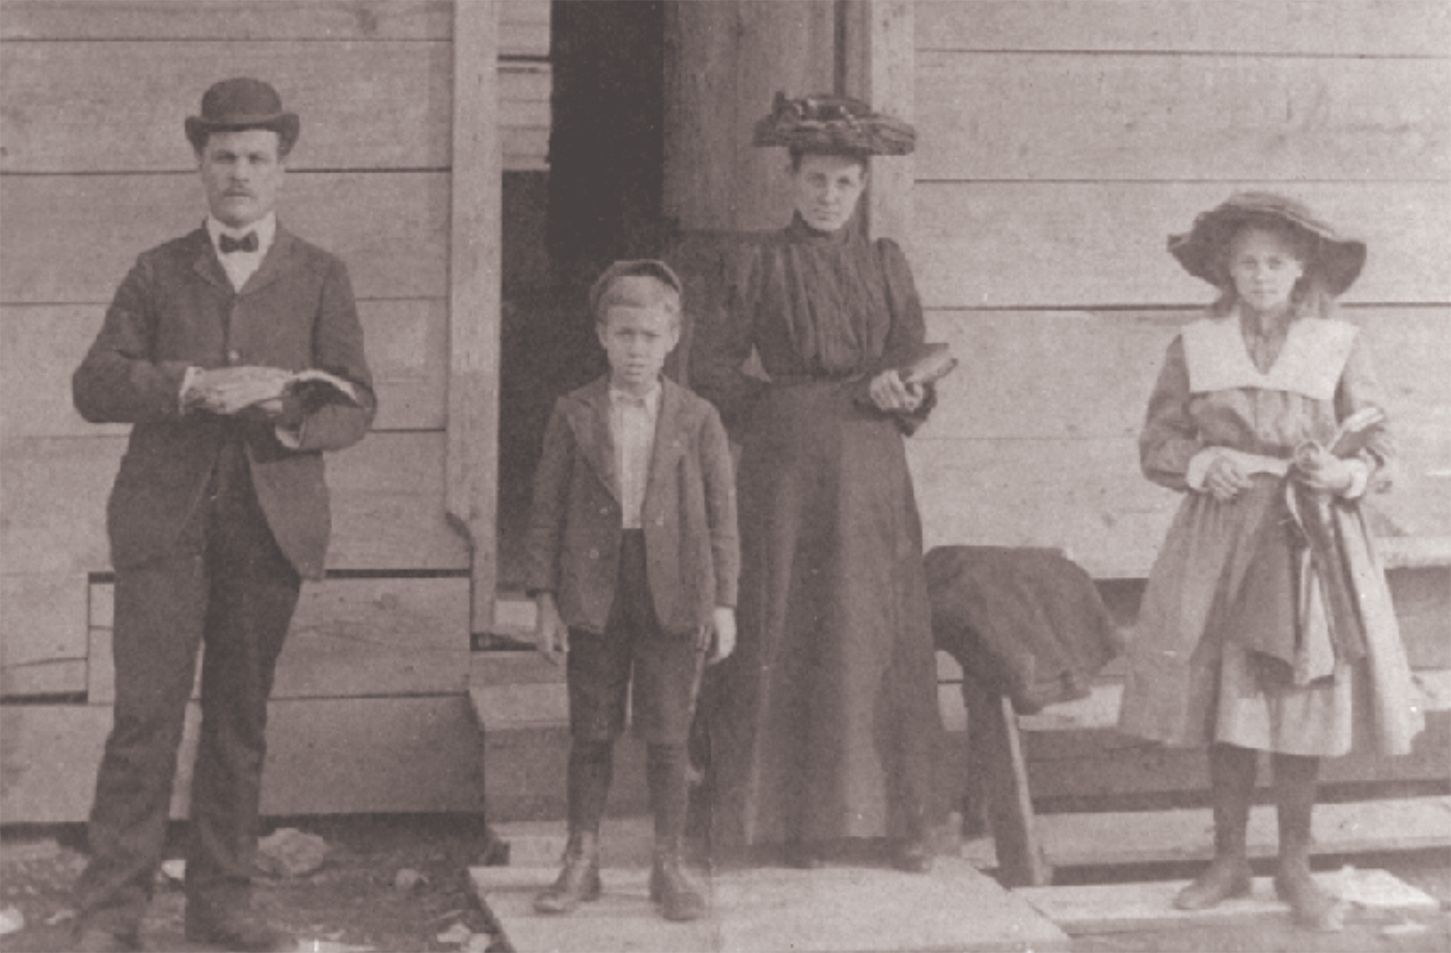 J.W. and Mattie Buckalew with their children, Grace and Colie